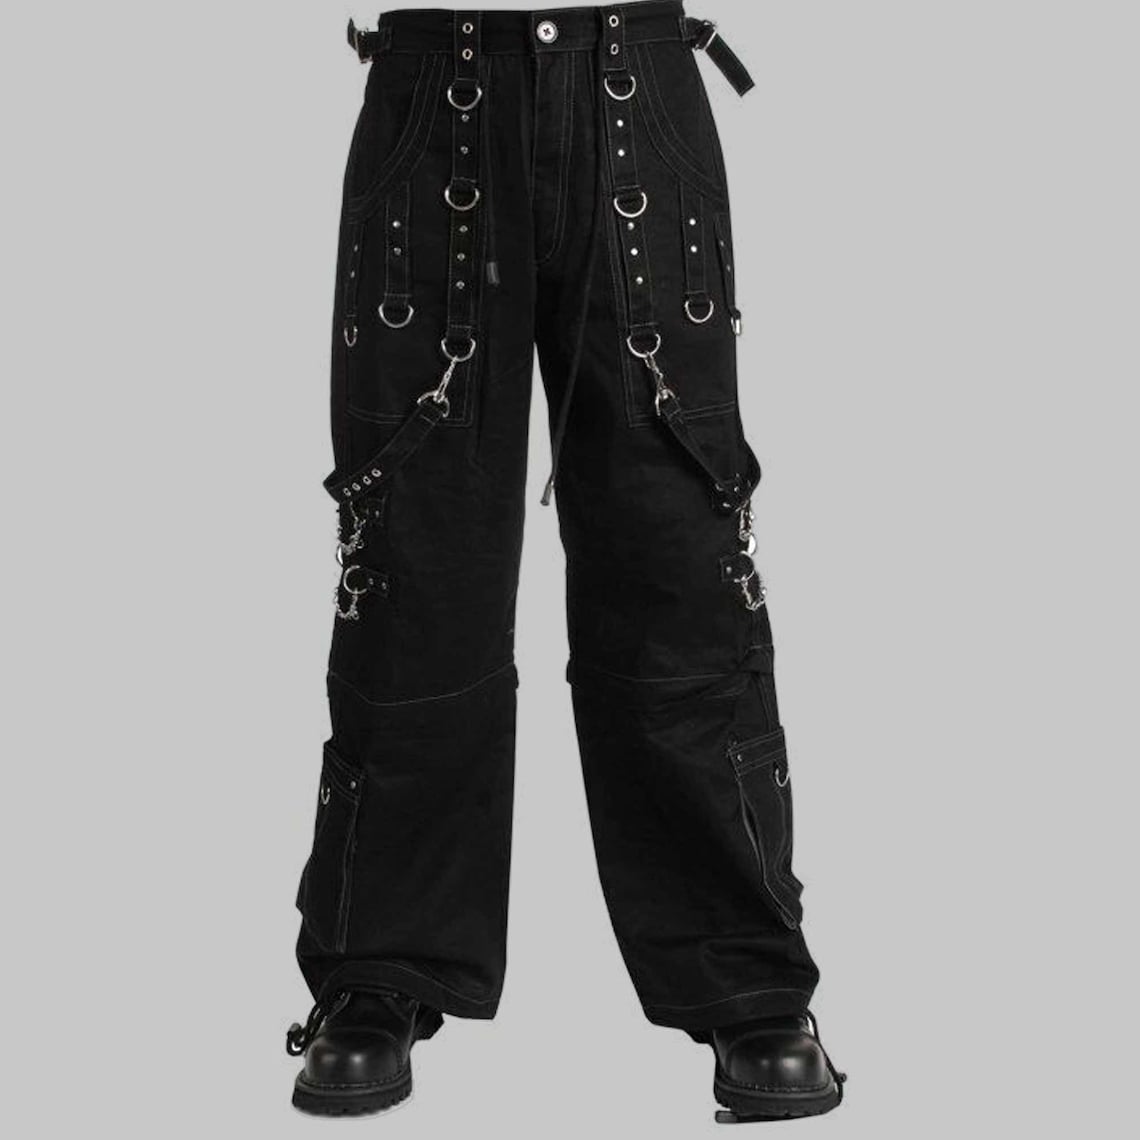 Gothic Pant  RED Super Skull Gothic Cyber Chain Goth Jeans Punk